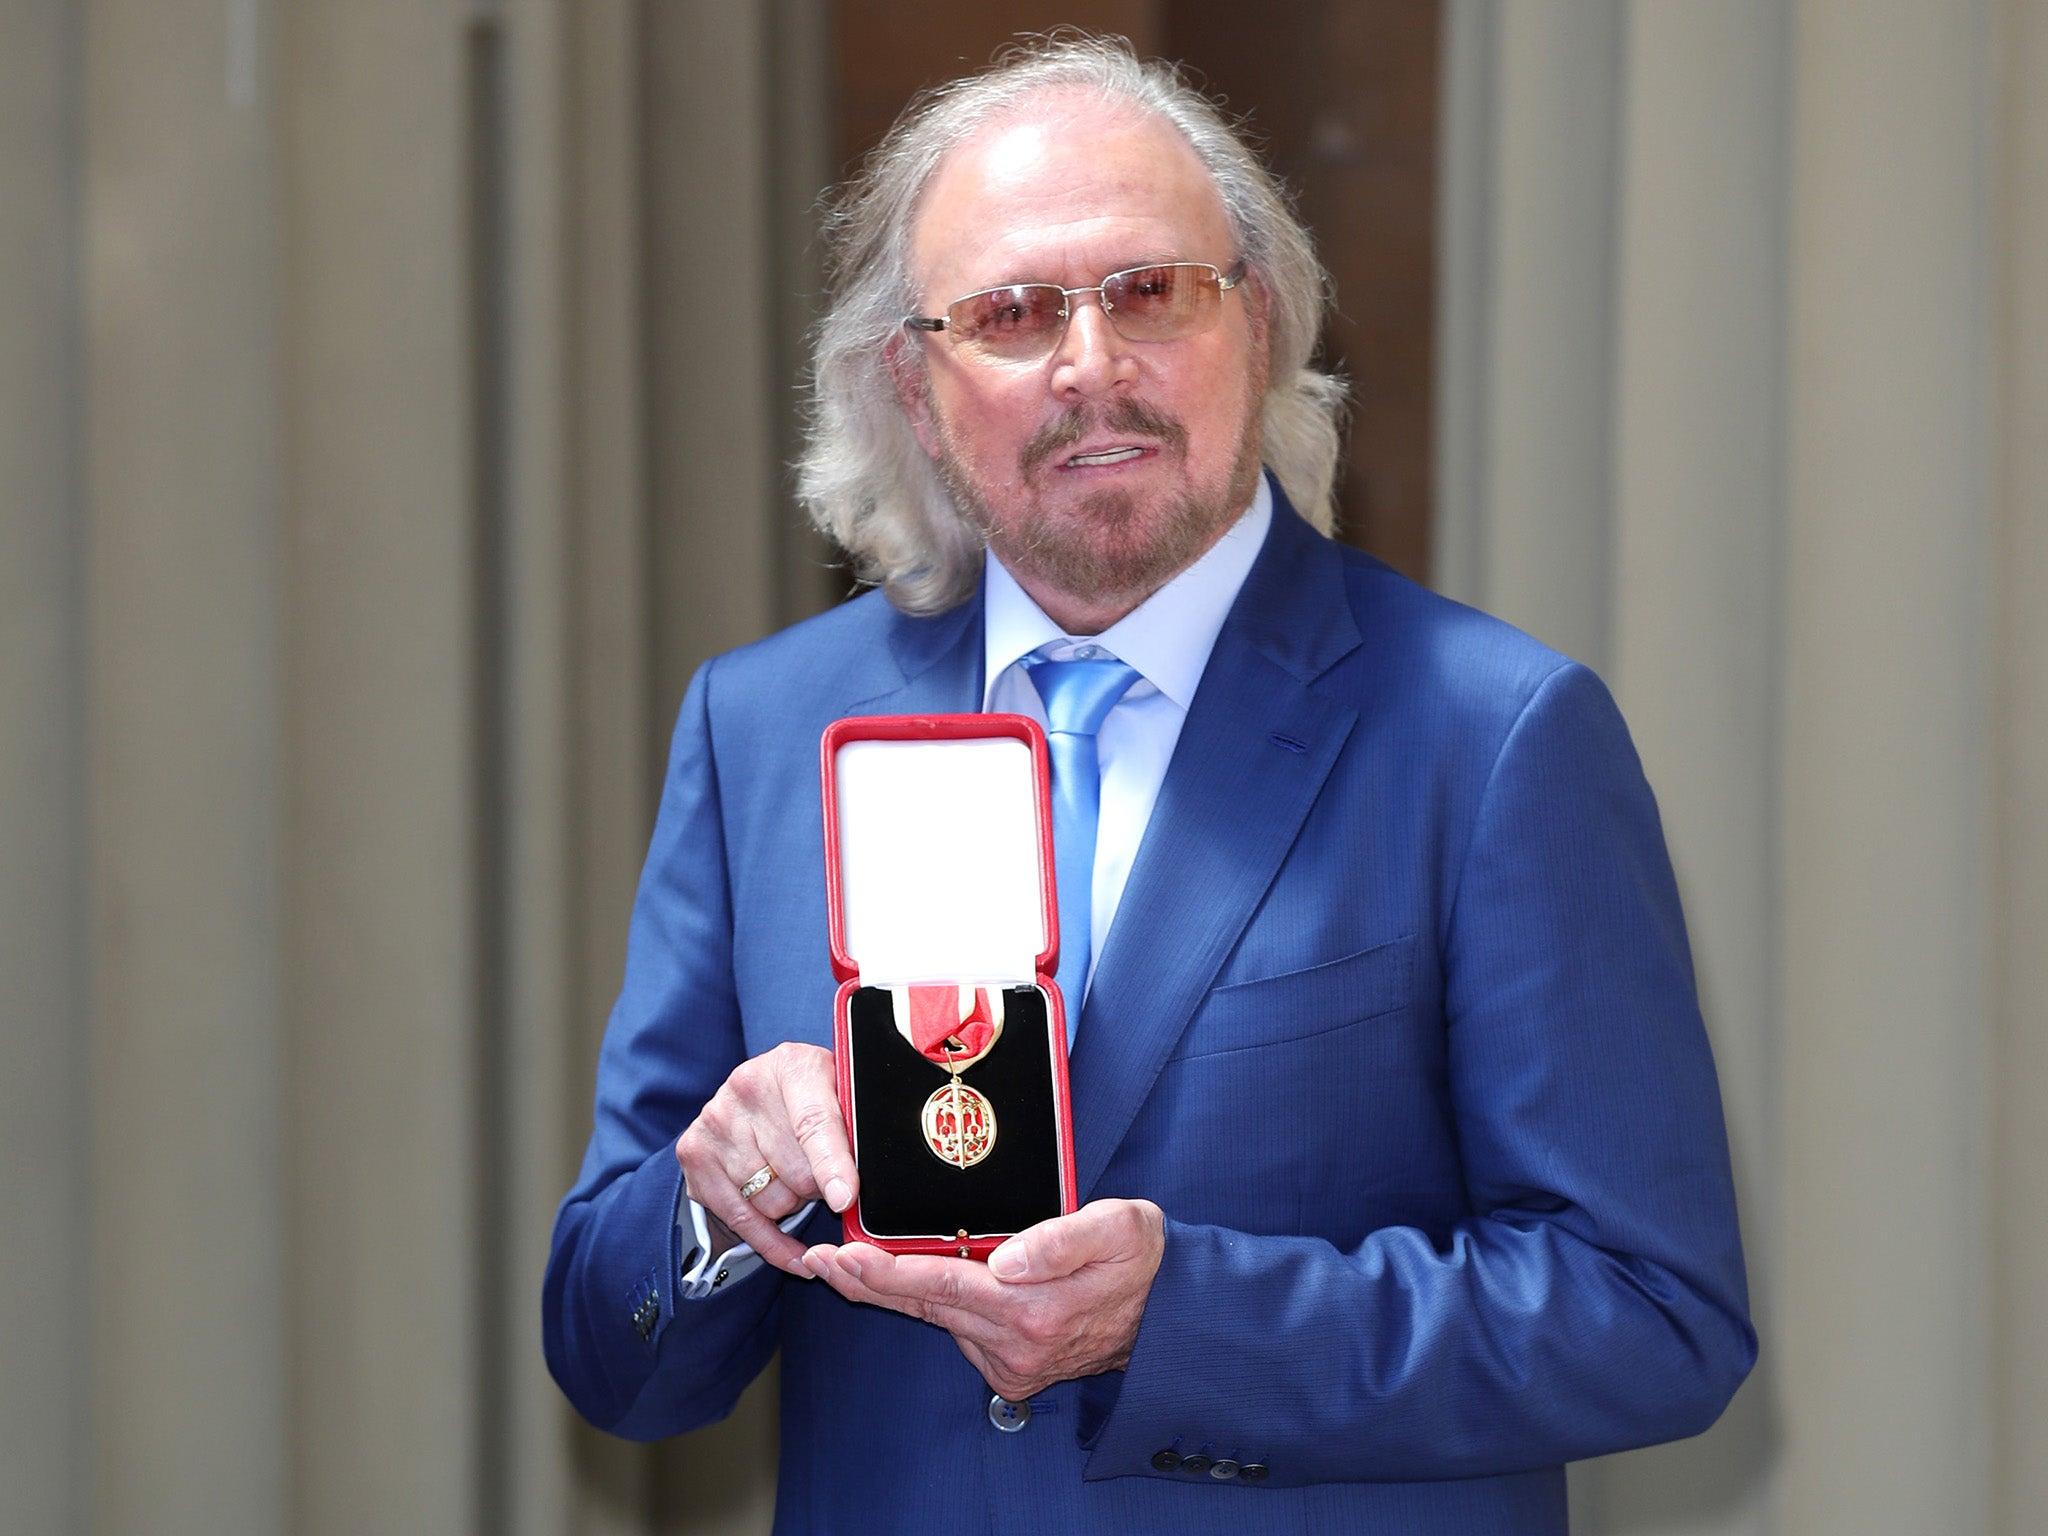 Sir Barry Gibb knighted at Buckingham Palace by Prince Charles: 'If